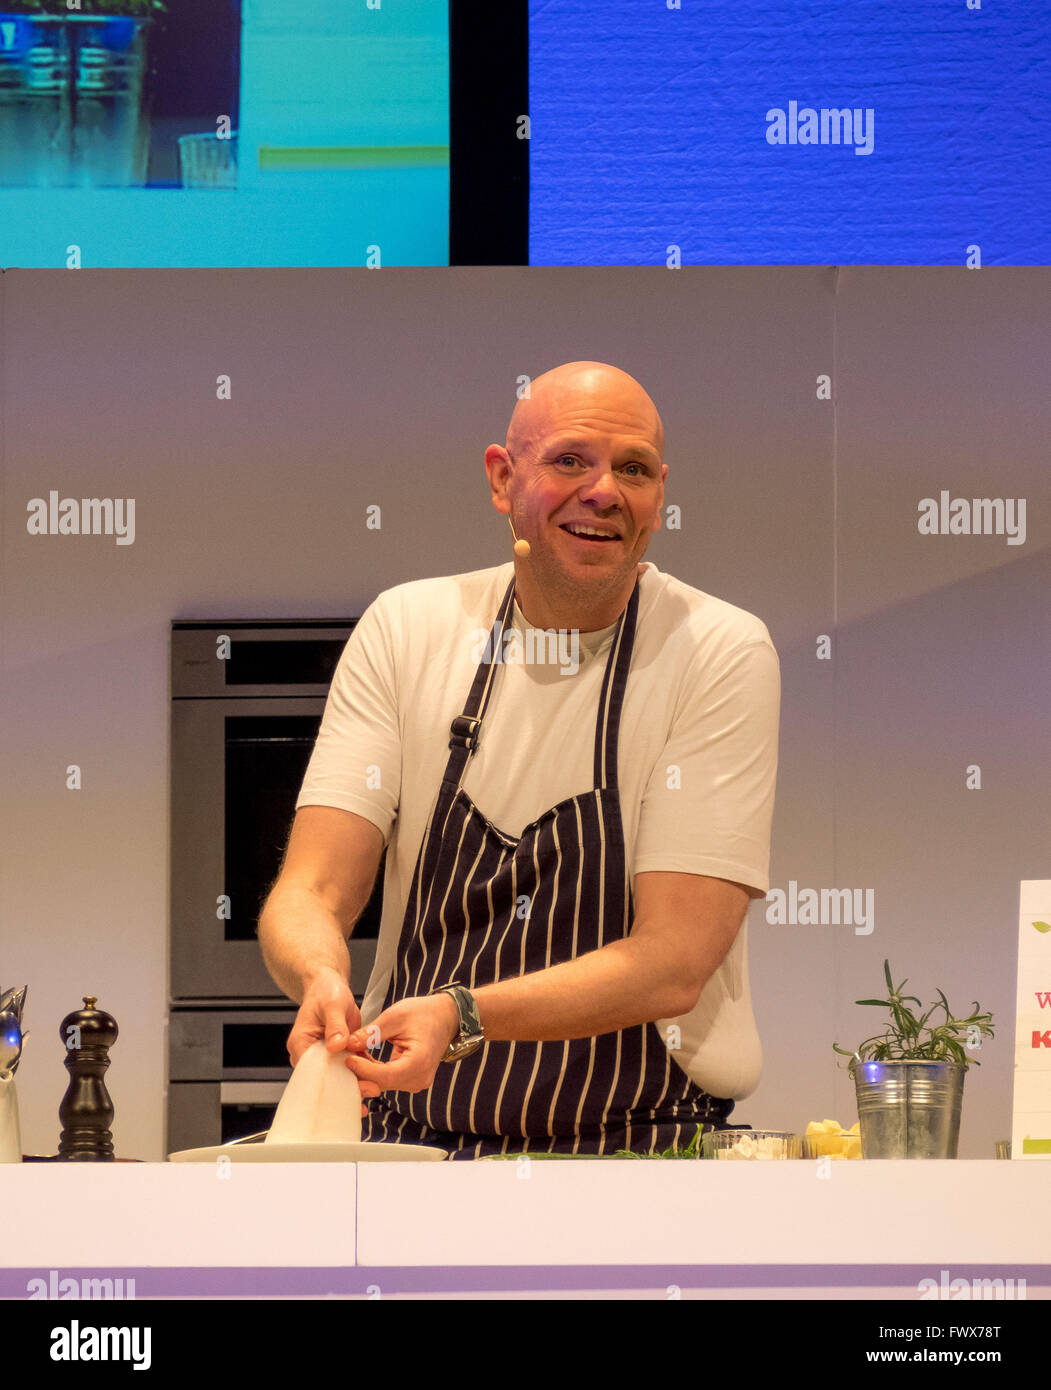 Harrogate, UK. 8th April, 2016. Tom Kerridge, presenter of Crème de la Crème, cooking live in the Supertheatre at the BBC Good Food Show Spring event in Harrogate.  Over 100 exhibitors are showcasing their food products at the three day event. Photo Bailey-Cooper Photography/Alamy Live News Stock Photo